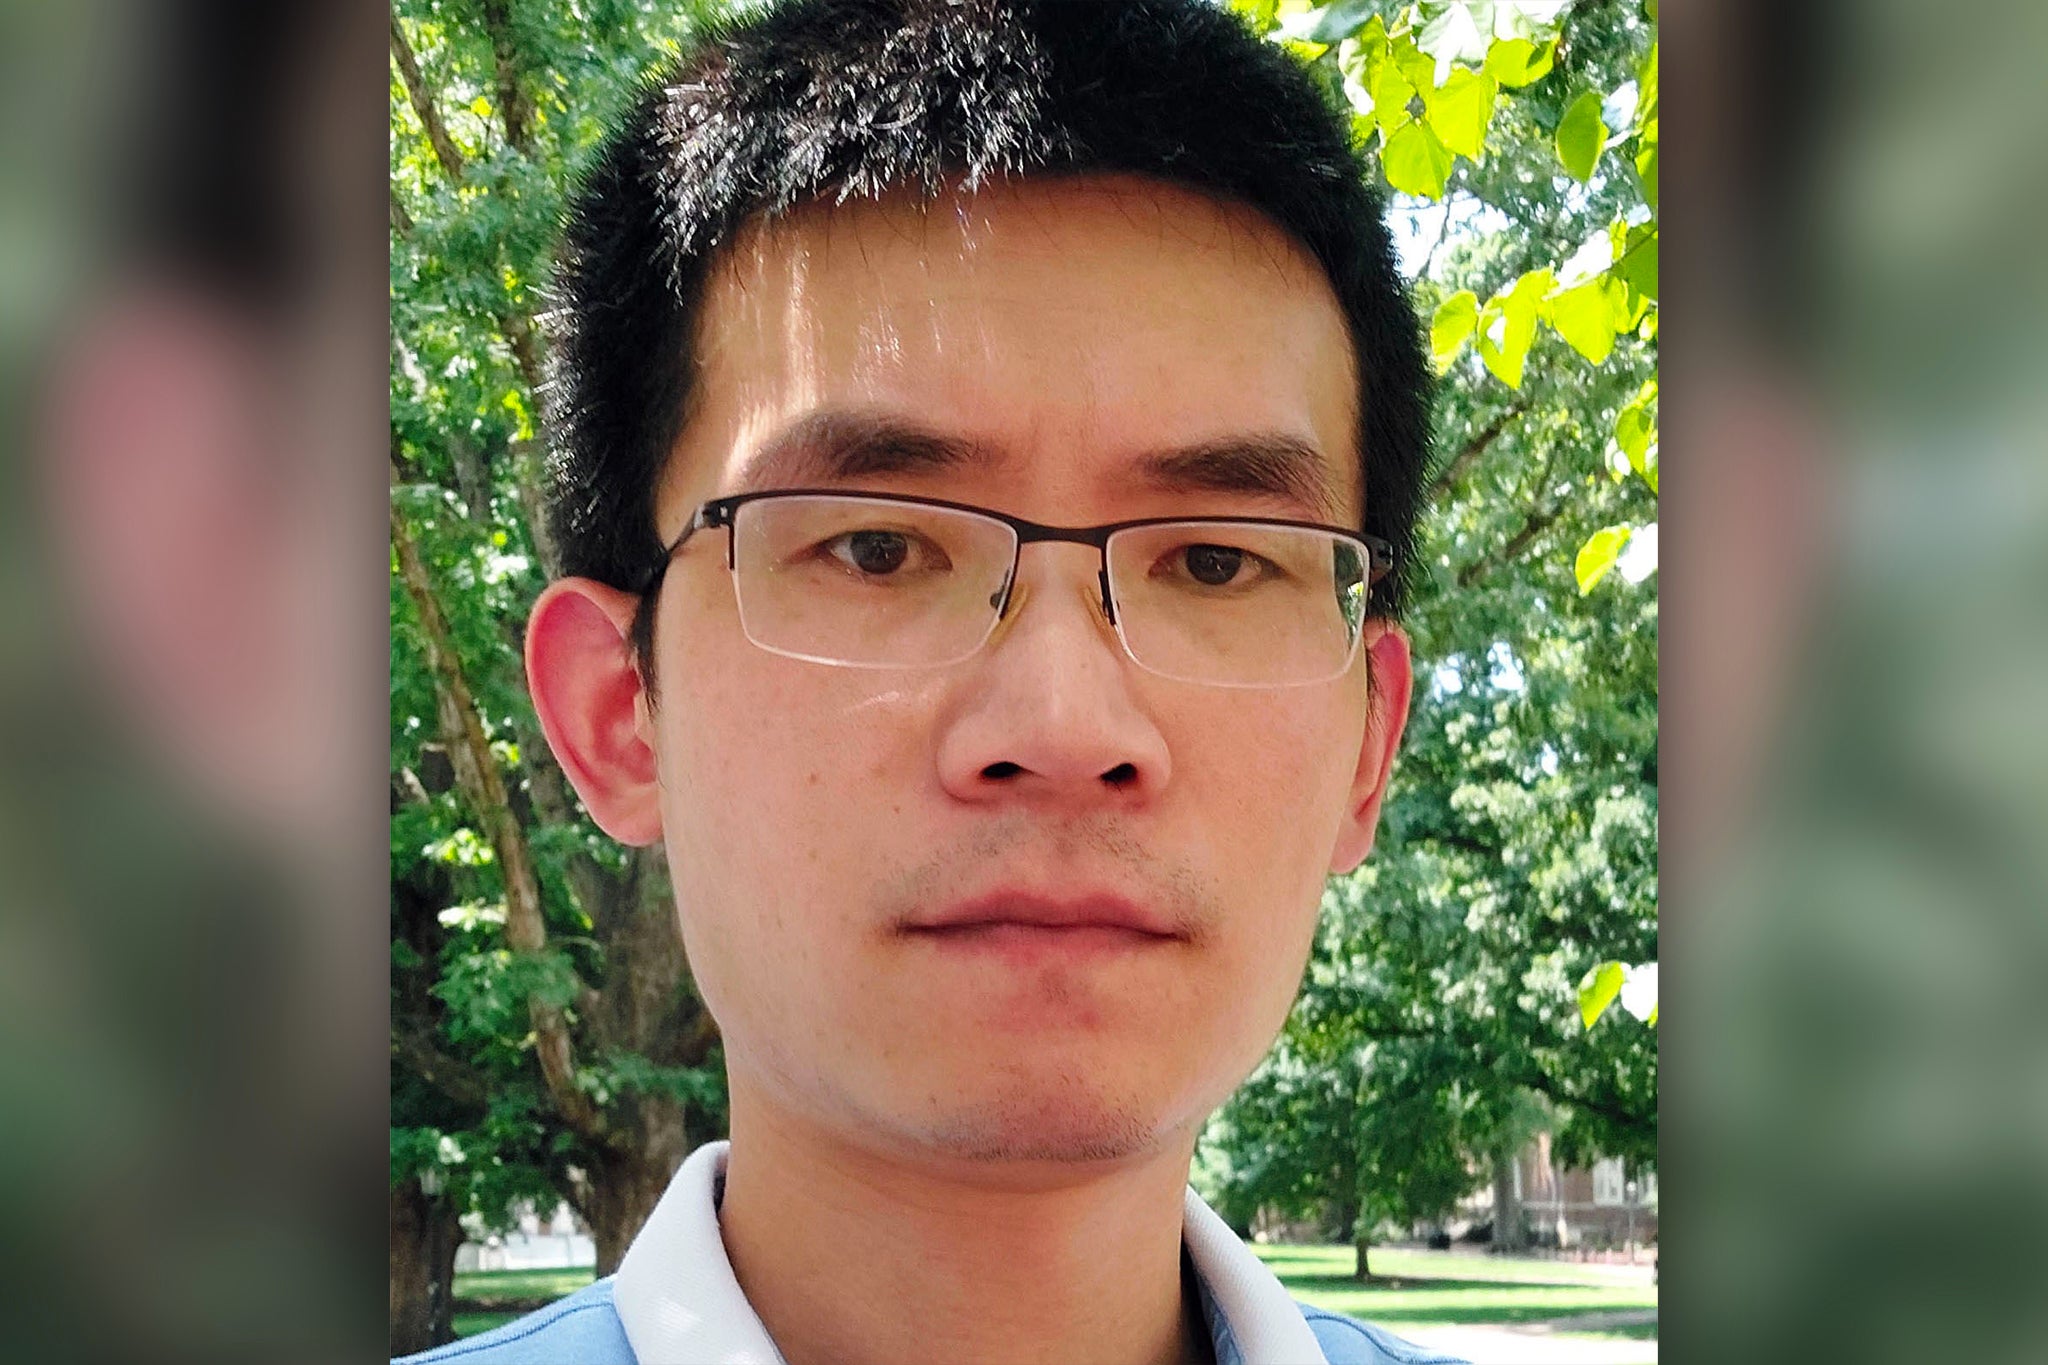 Zijie Yan was the faculty member killed on Monday’s shooting at UNC